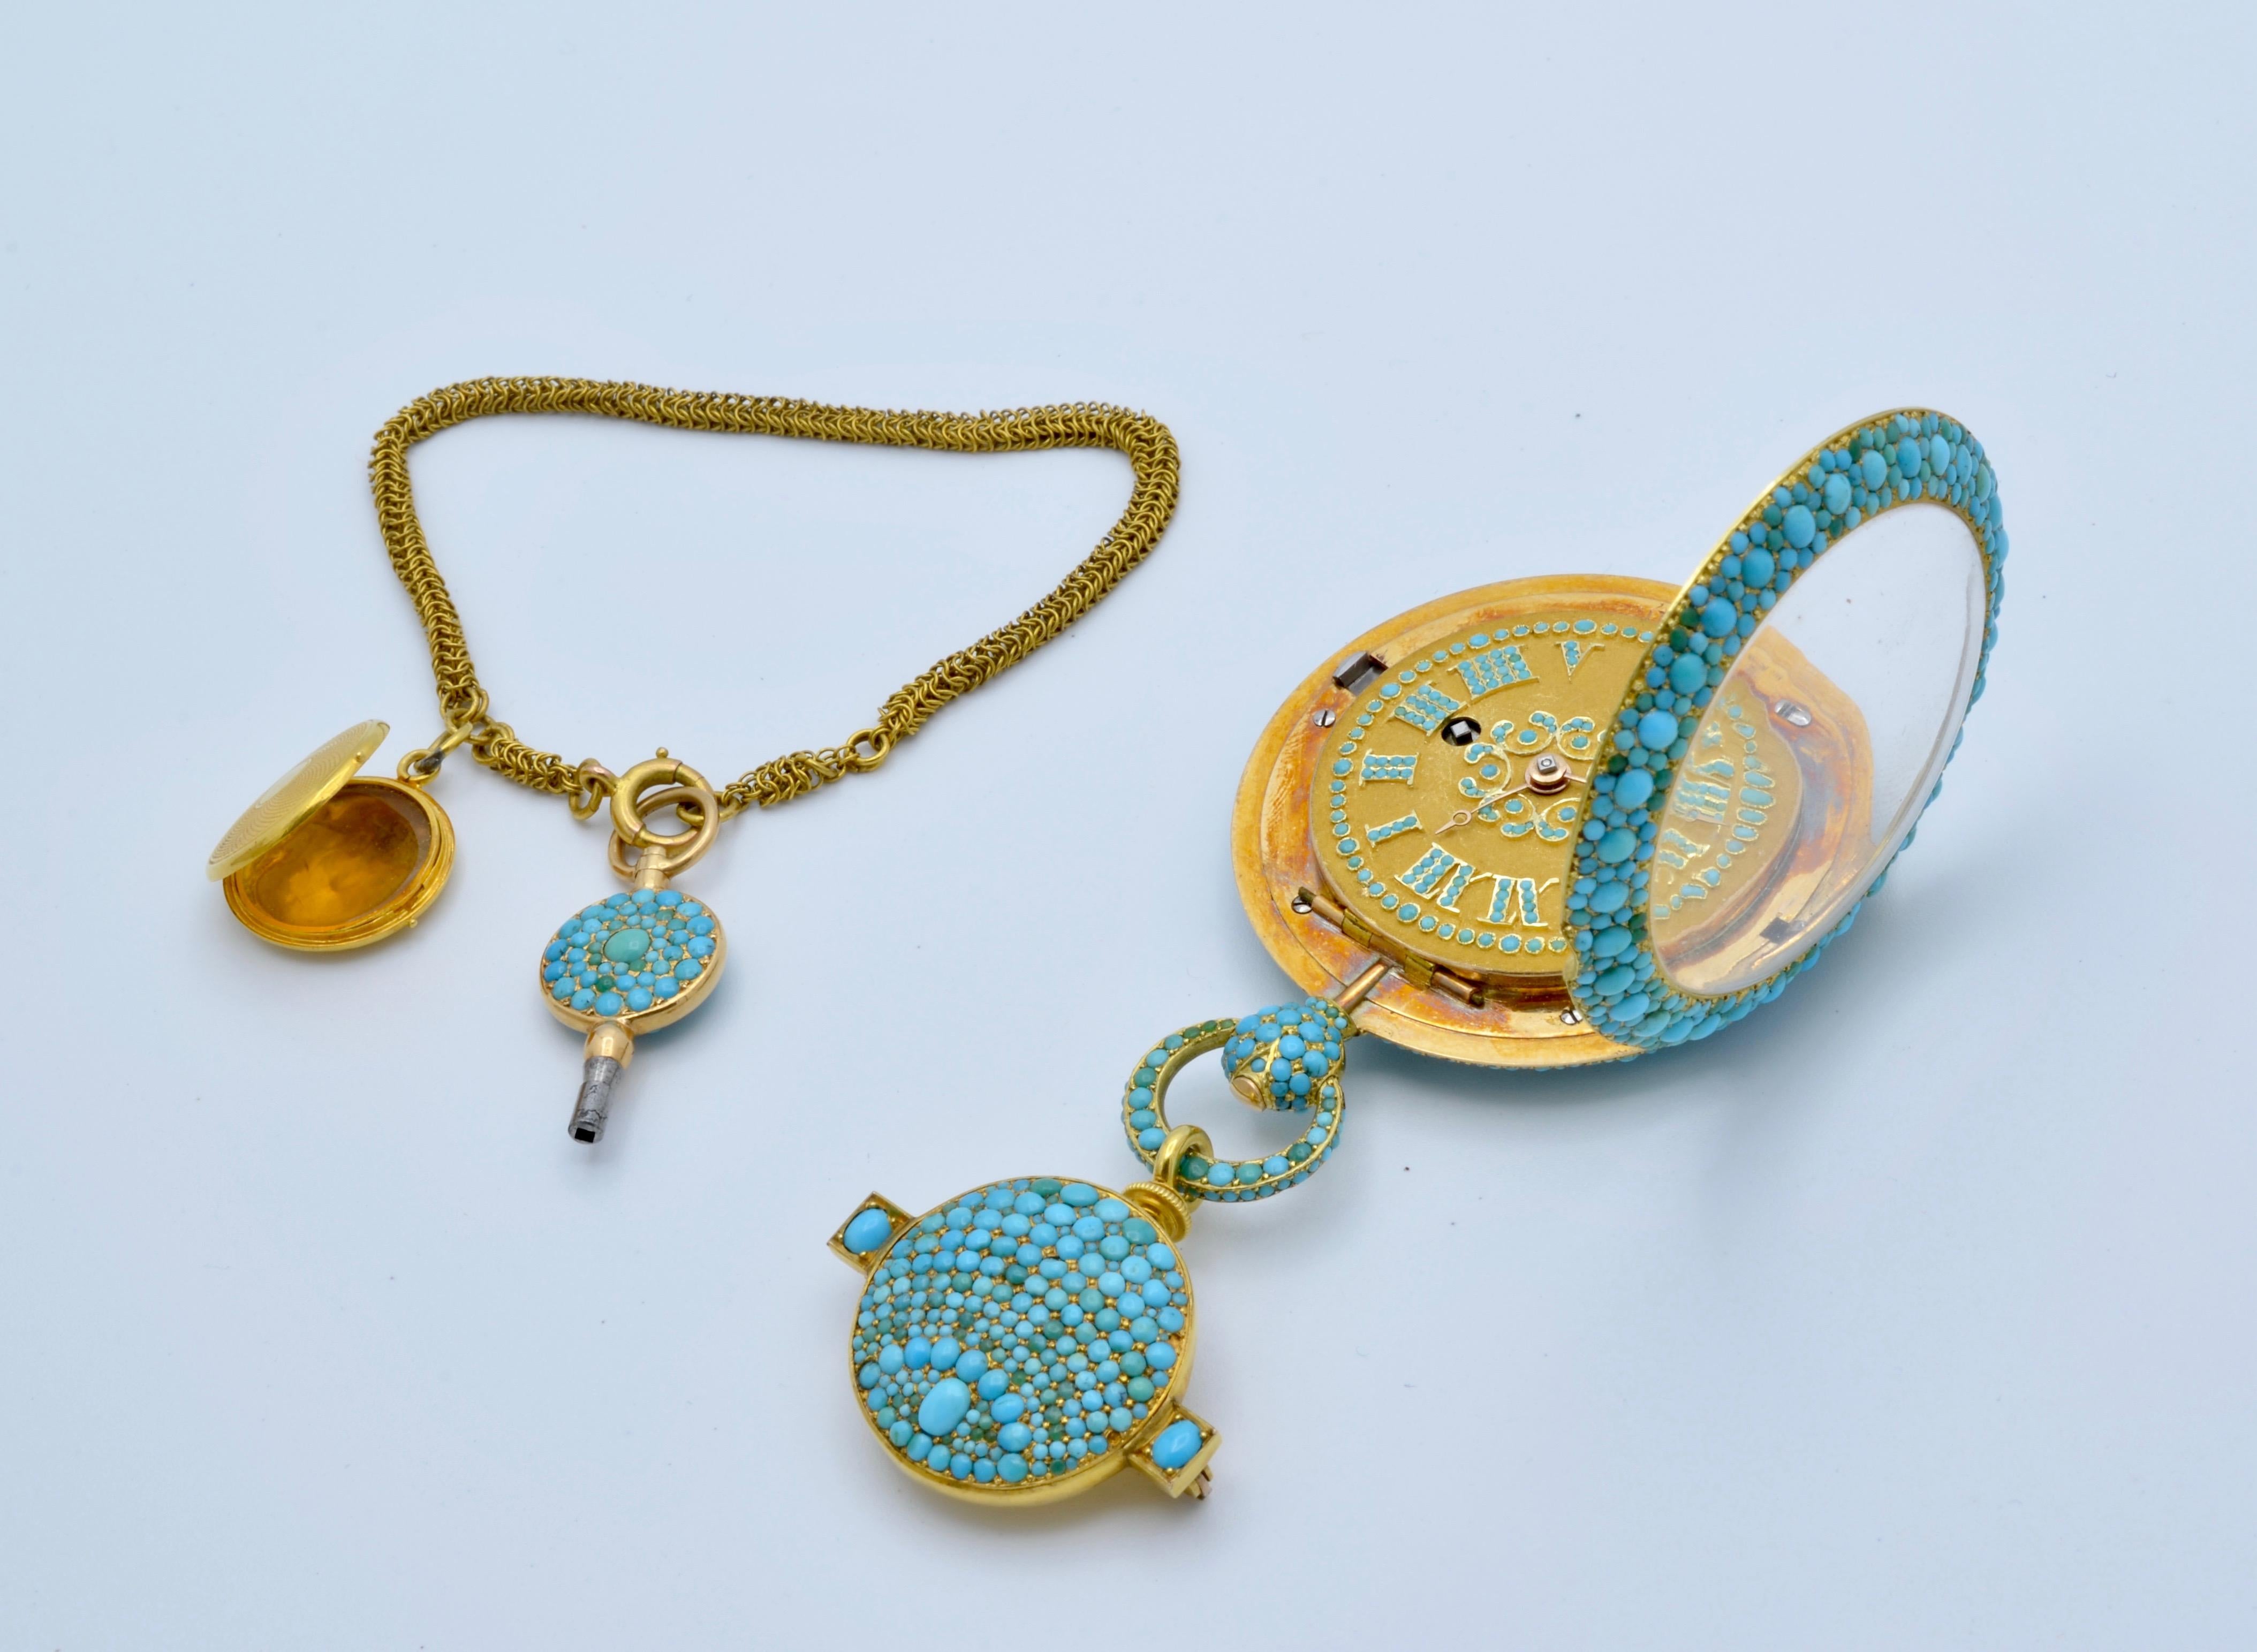 Round Cut 1830 Turquoise Lapel Gold Pocket Watch Bautte and Co with Chain and Locket